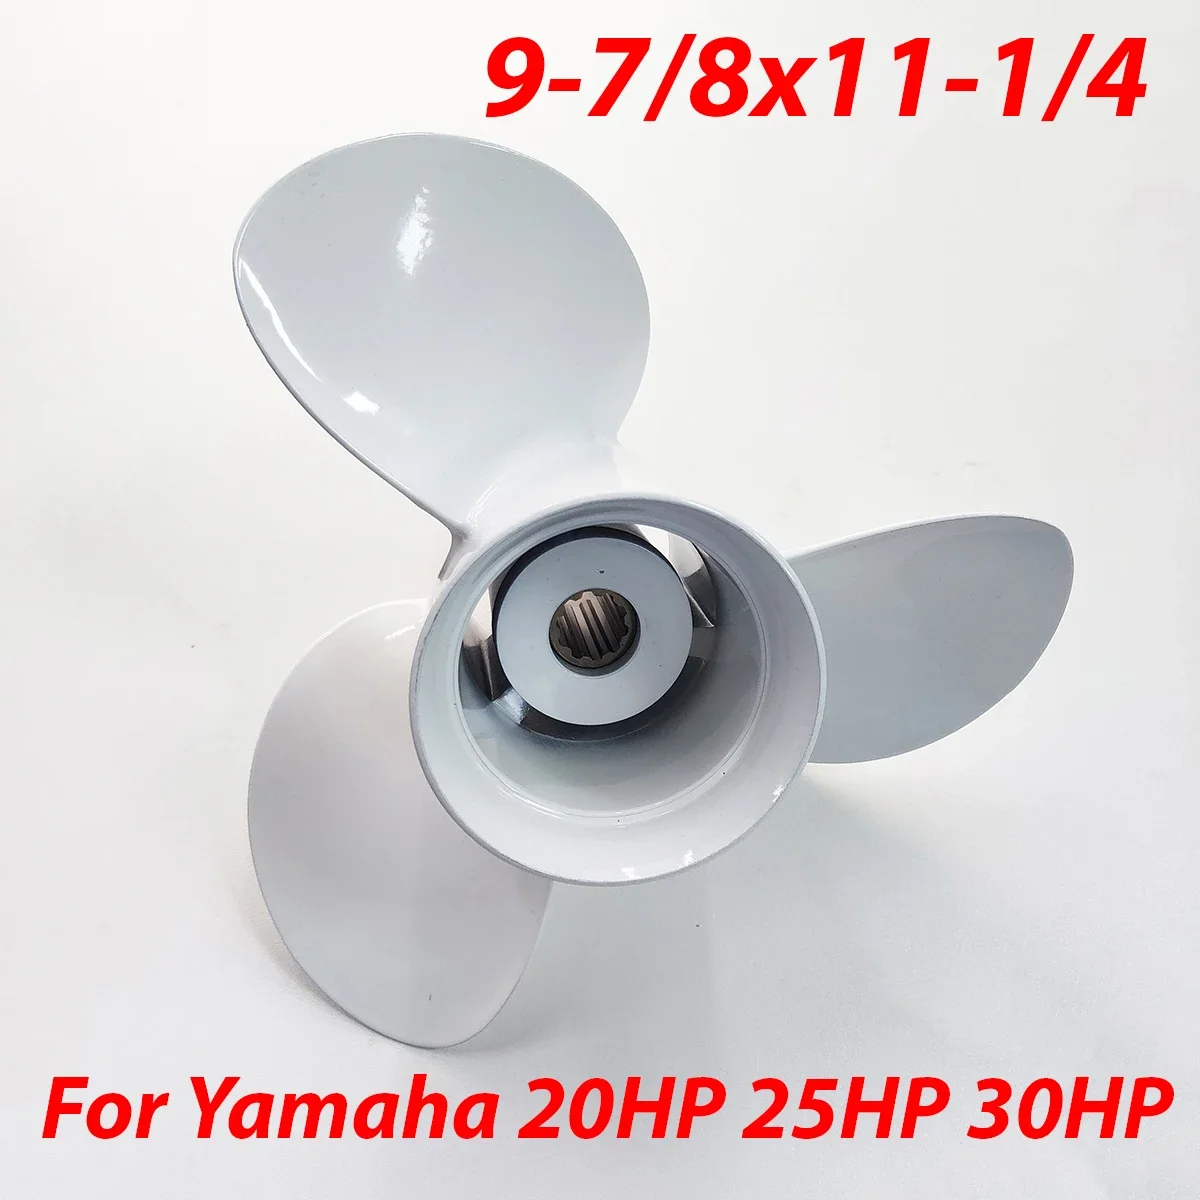 

9-7/8x11-1/4 Boat Outboard Propeller For Yamaha 20HP 25HP 30HP Engine Motor Aluminum Alloy Screw 3 Blade 10 Tooth Spline